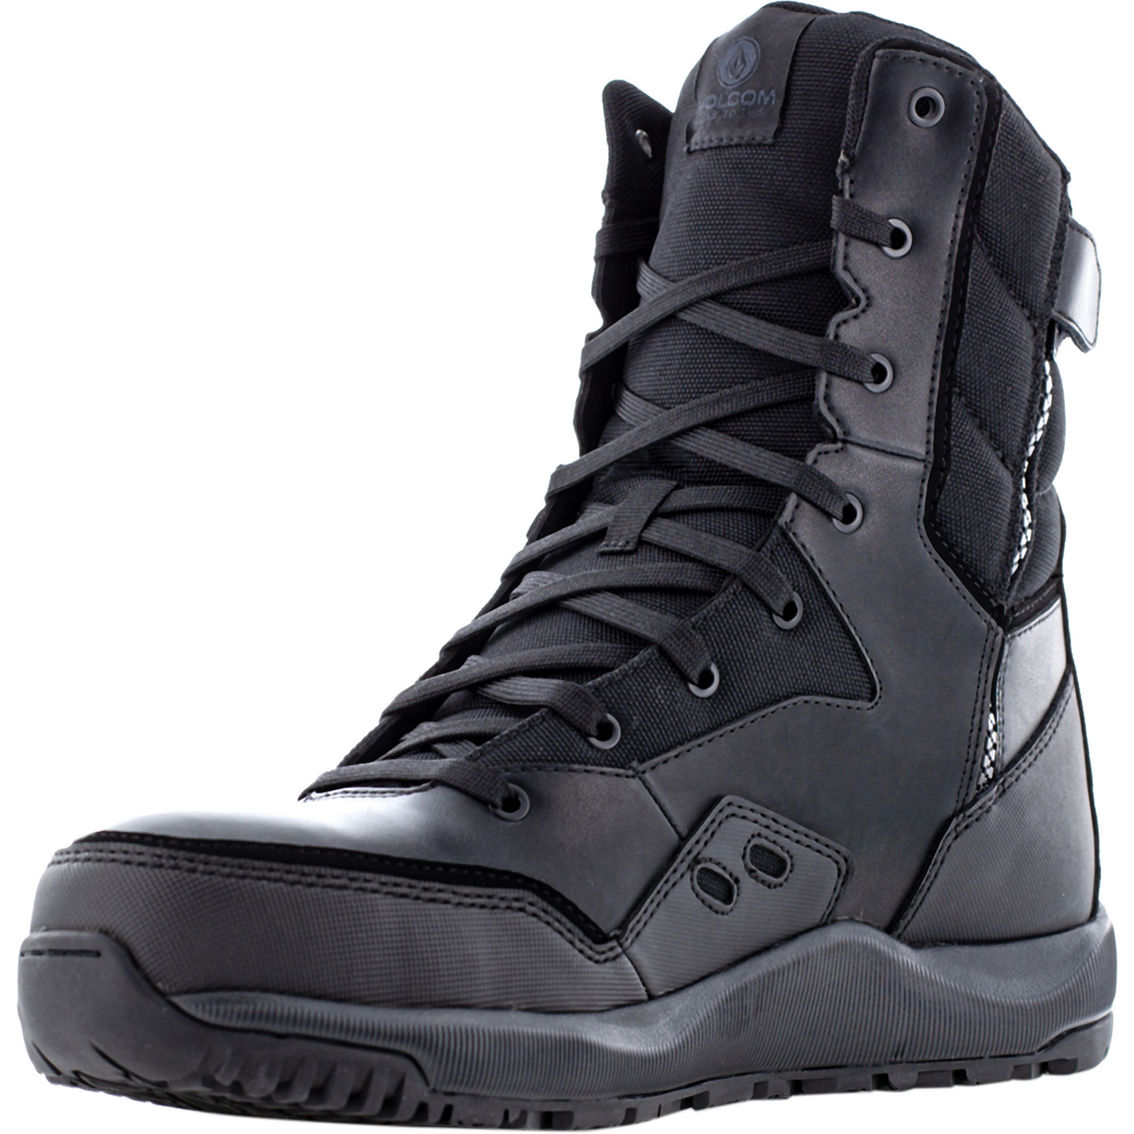 Volcom Street Shield VM30704 ASTM F2413 Electrical Hazard Protection Boots - Image 2 of 5